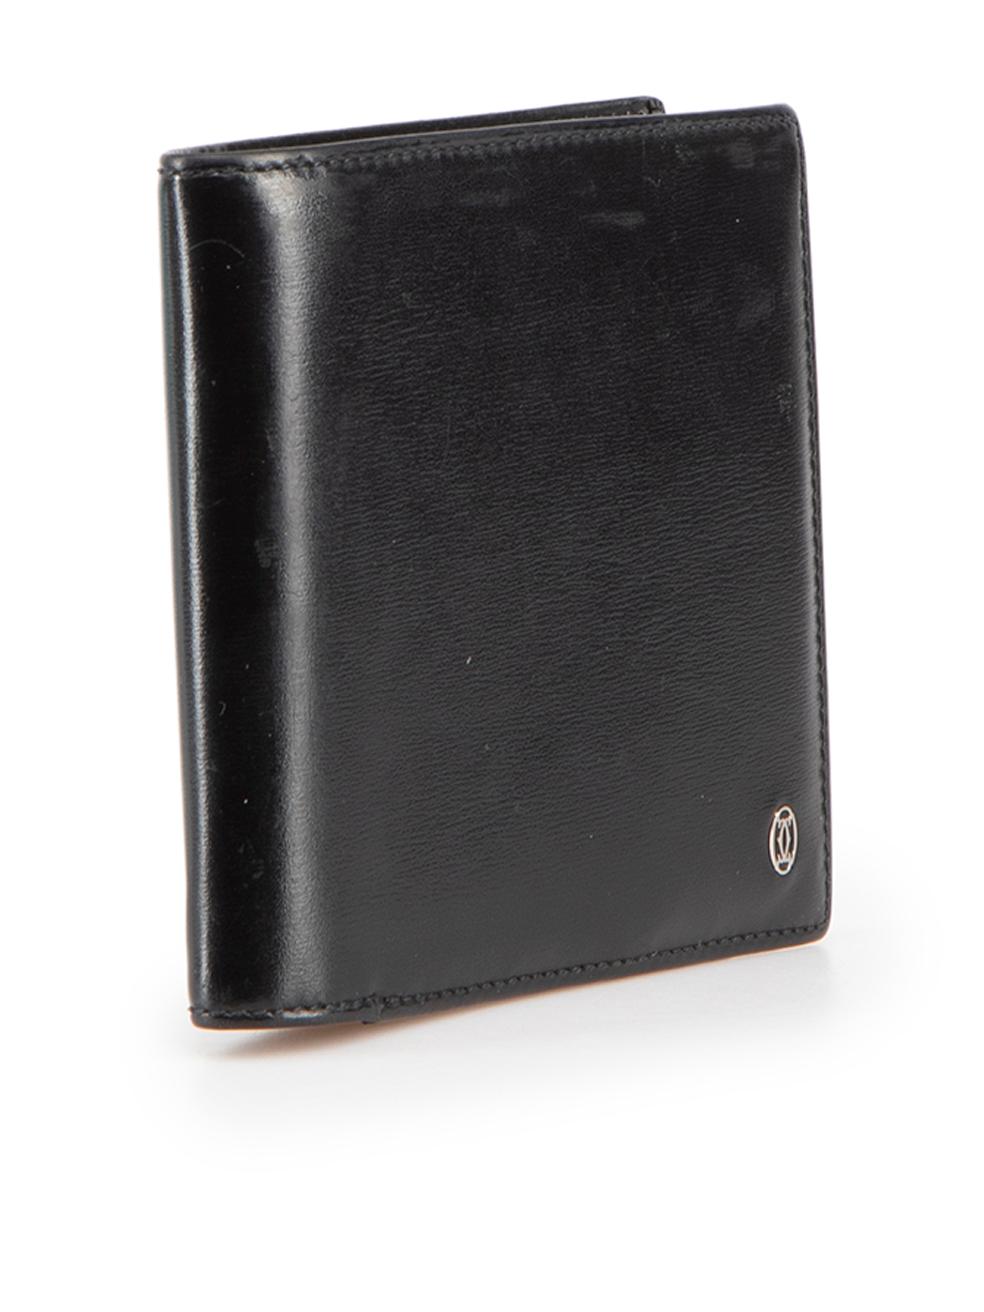 CONDITION is Good. Minor wear to wallet is evident. Light wear to the front and lining with light abrasions to the leather. The edge on the card holder section has come apart on this used Cartier designer resale item.
 
 Details
 Black
 Leather
